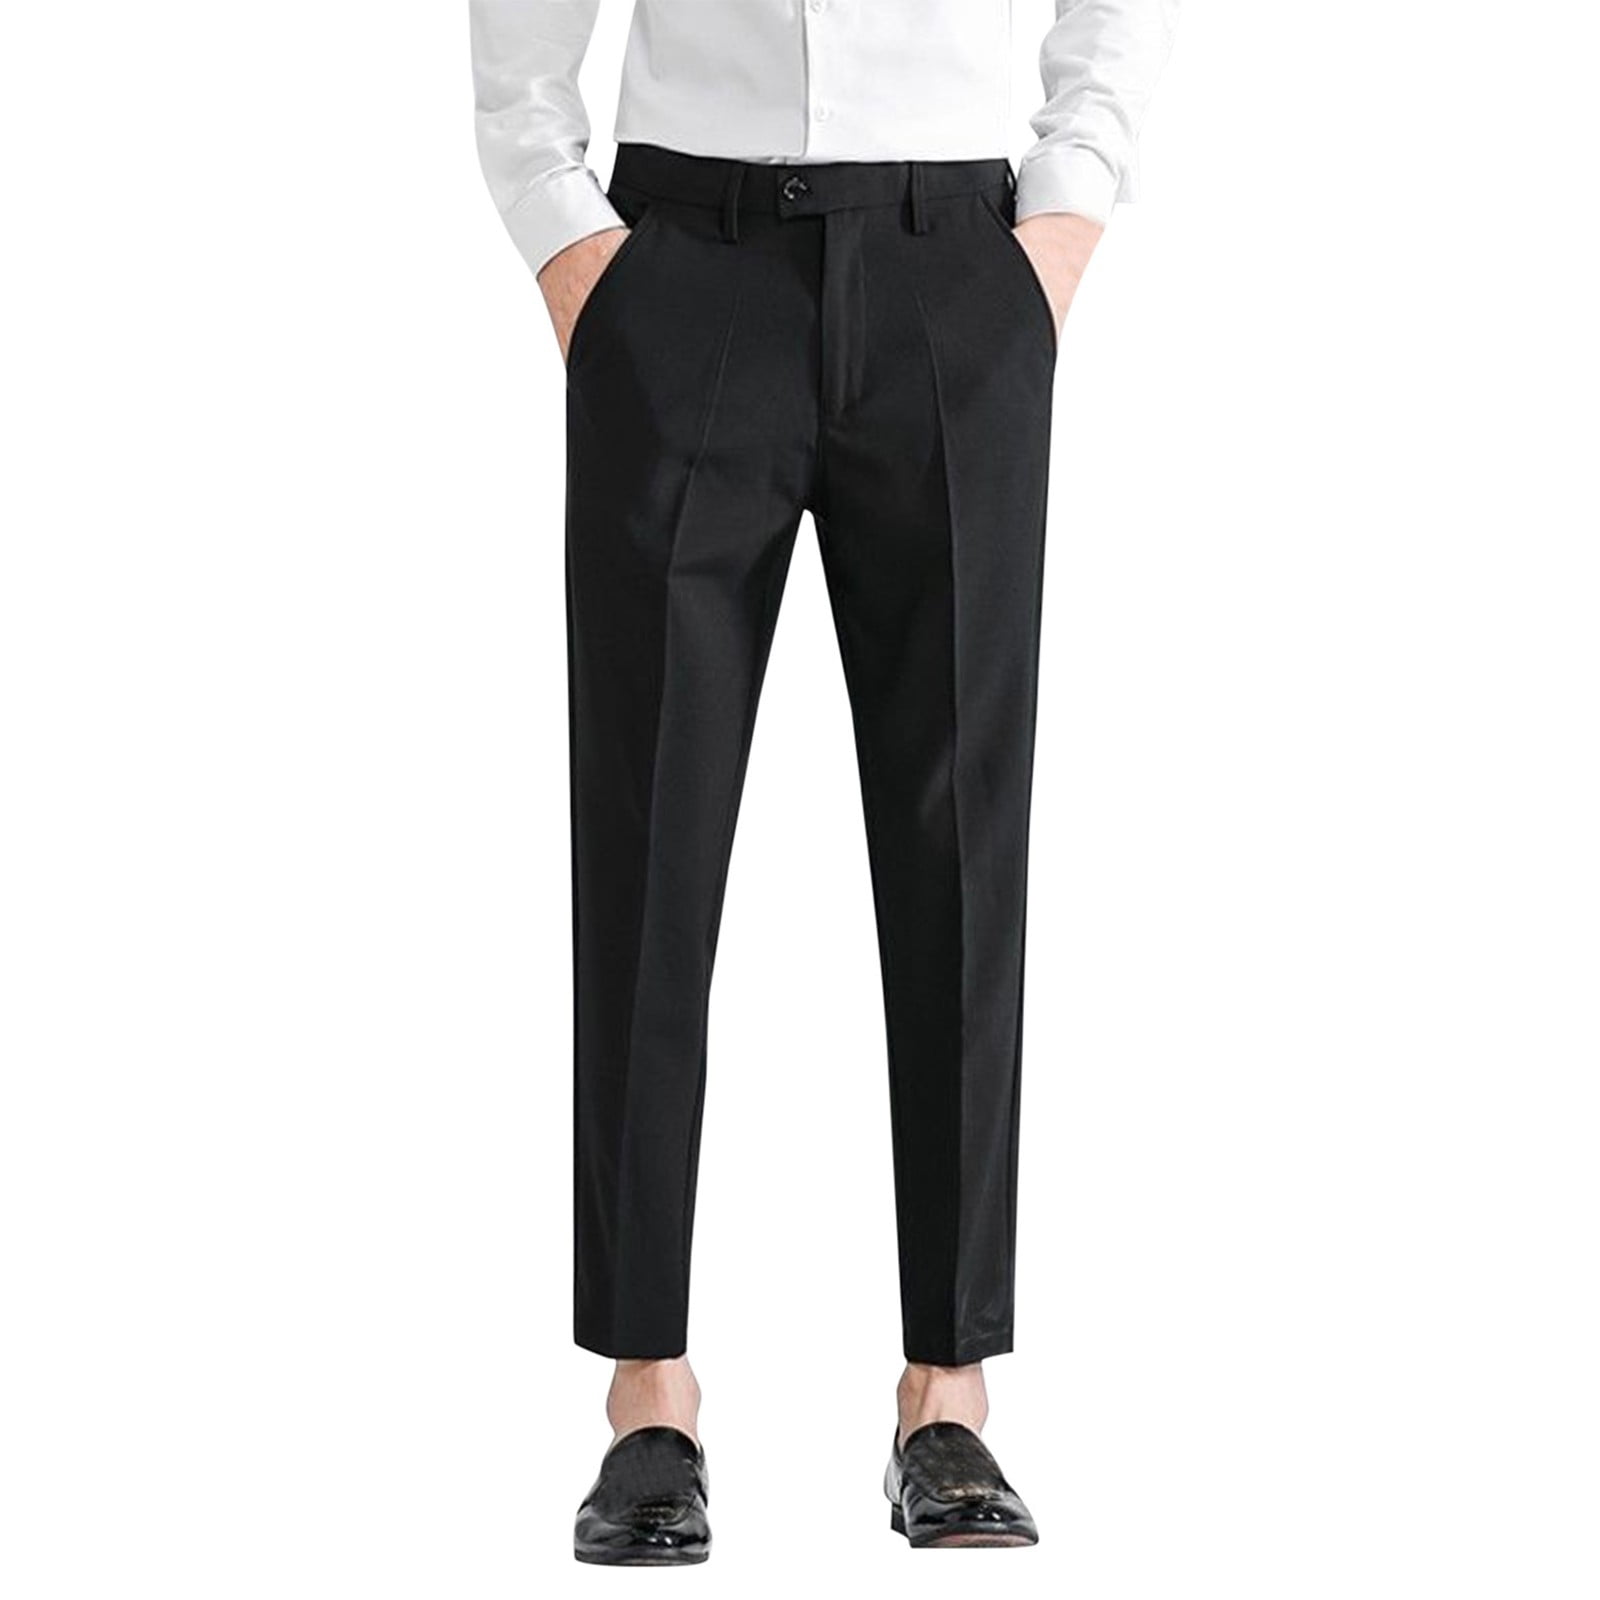 Spring Summer Suit Pants Men Stretch Business Elastic Waist Slim Ankle  Length Pant Korean Thin Trousers Male Large Size 40 42 Size: 34, Color:  Khaki-Ankle | Uquid shopping cart: Online shopping with crypto currencies